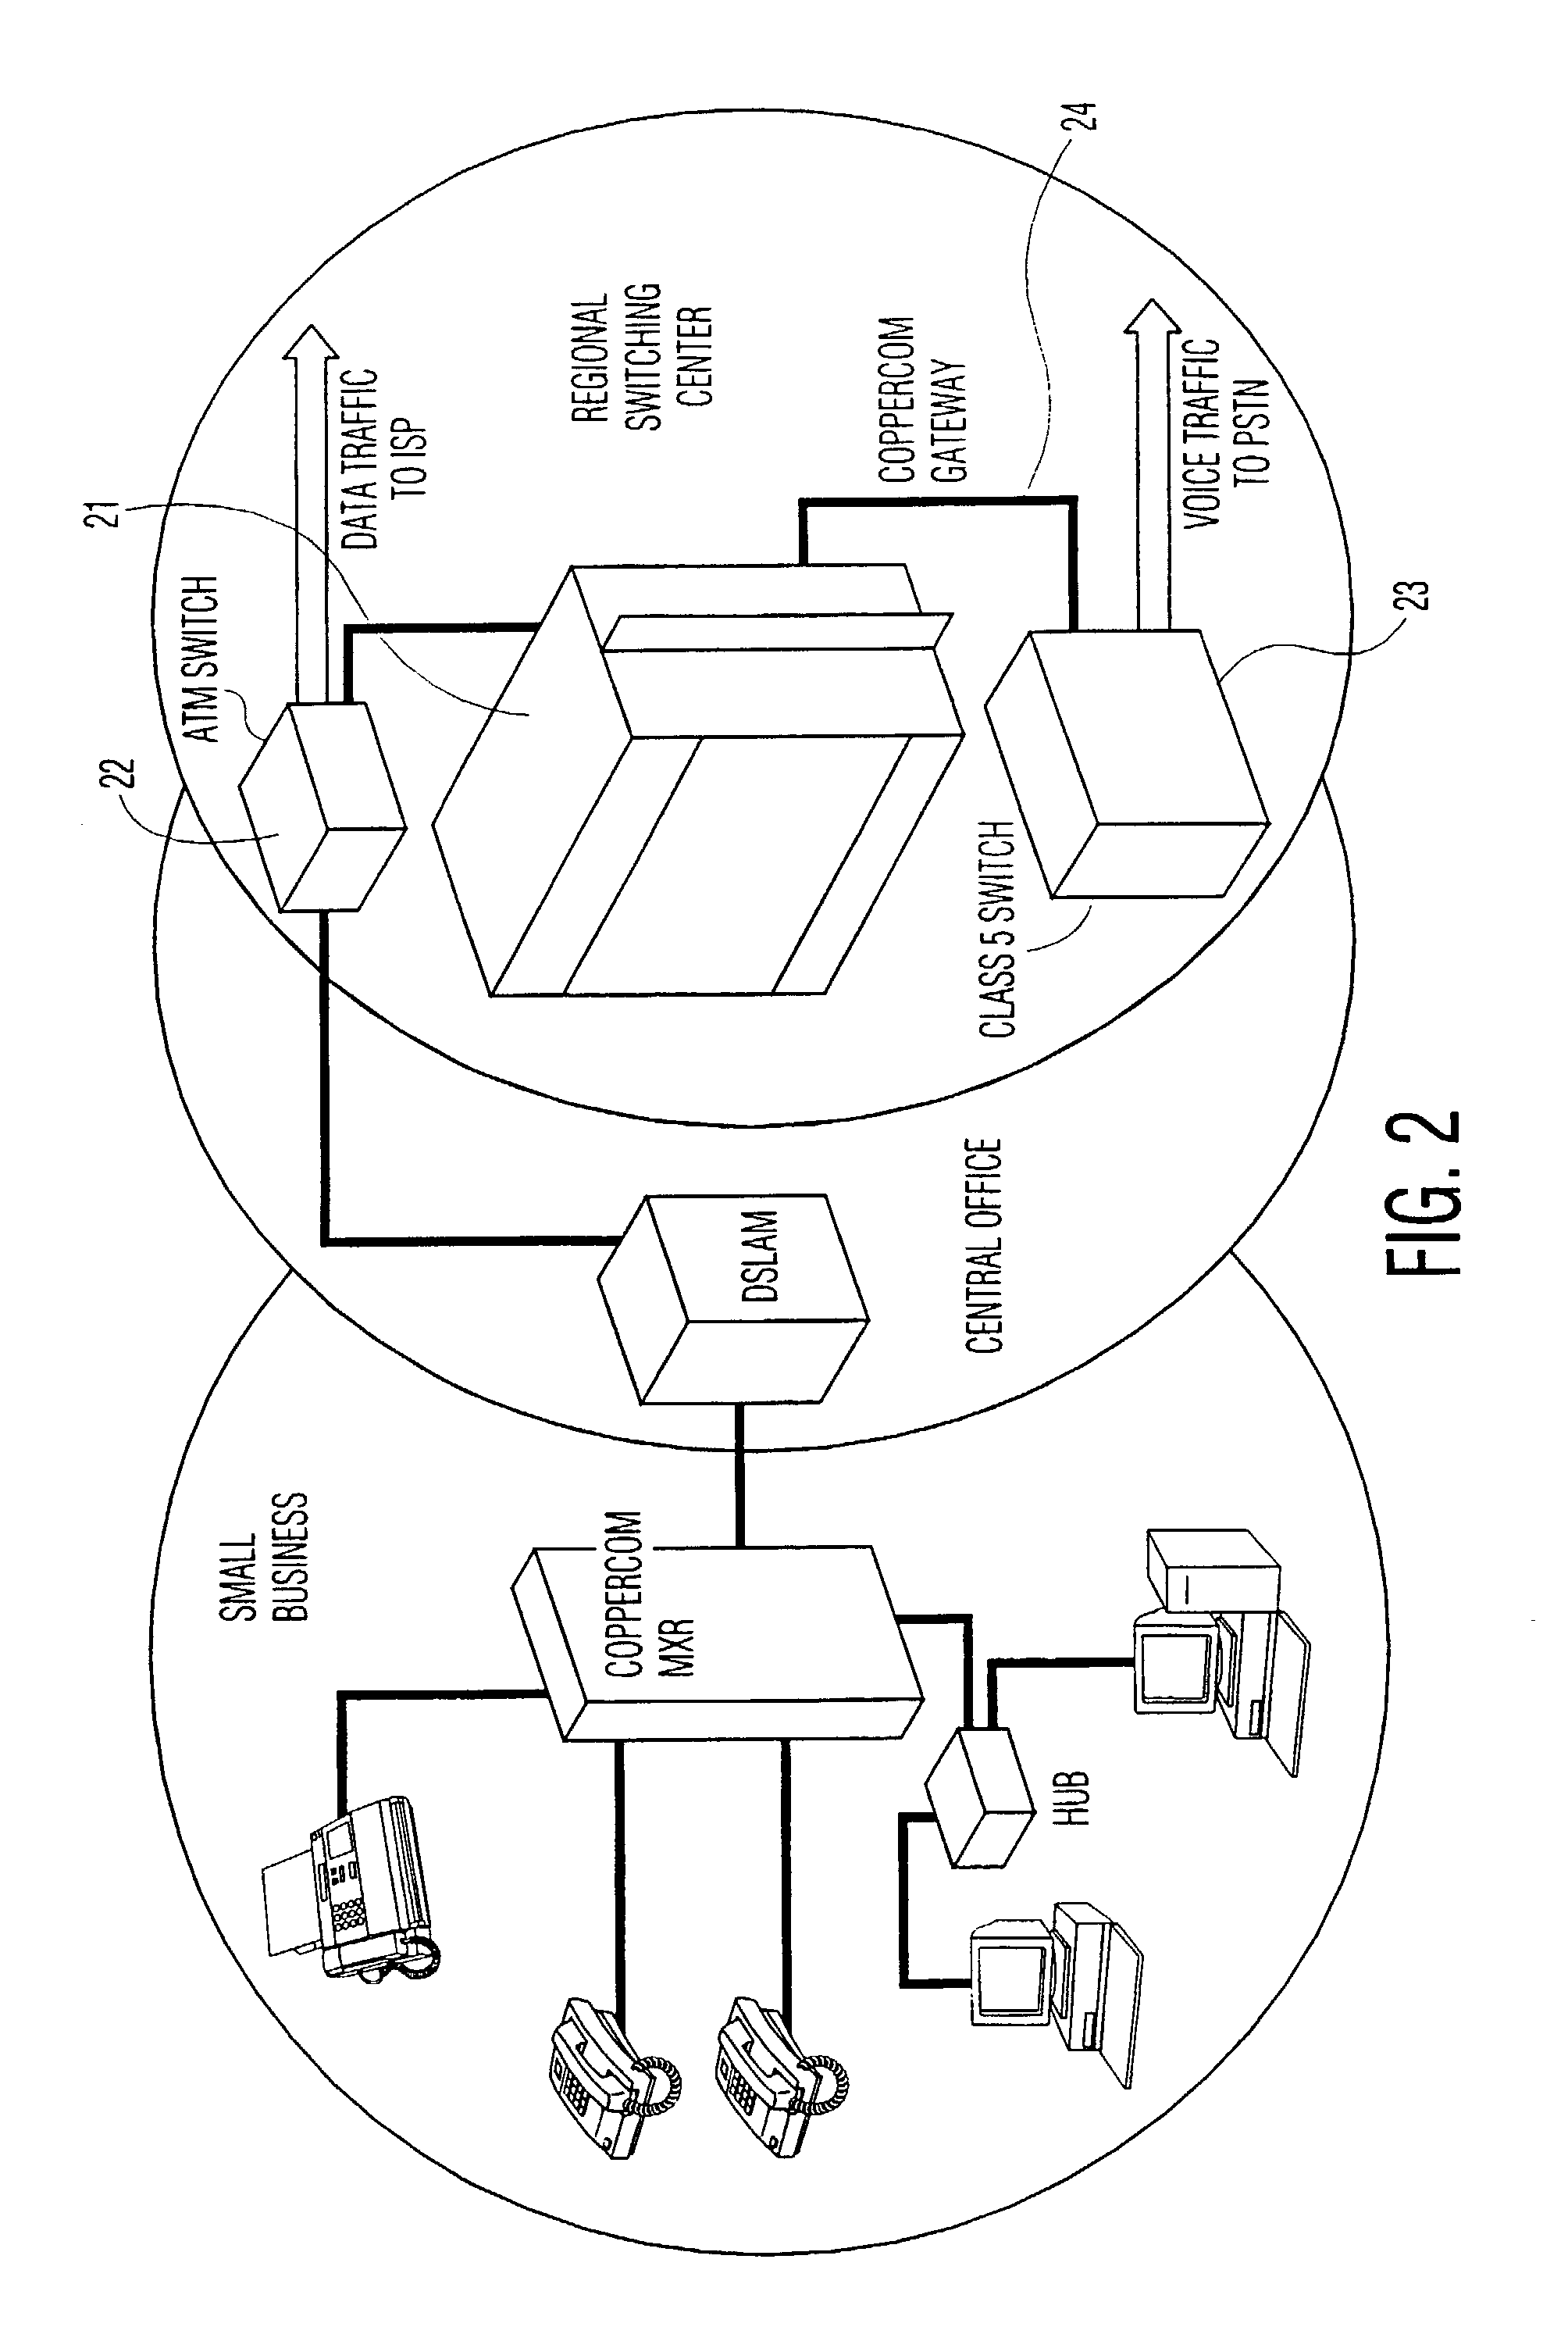 System and method for providing voice and/or data services